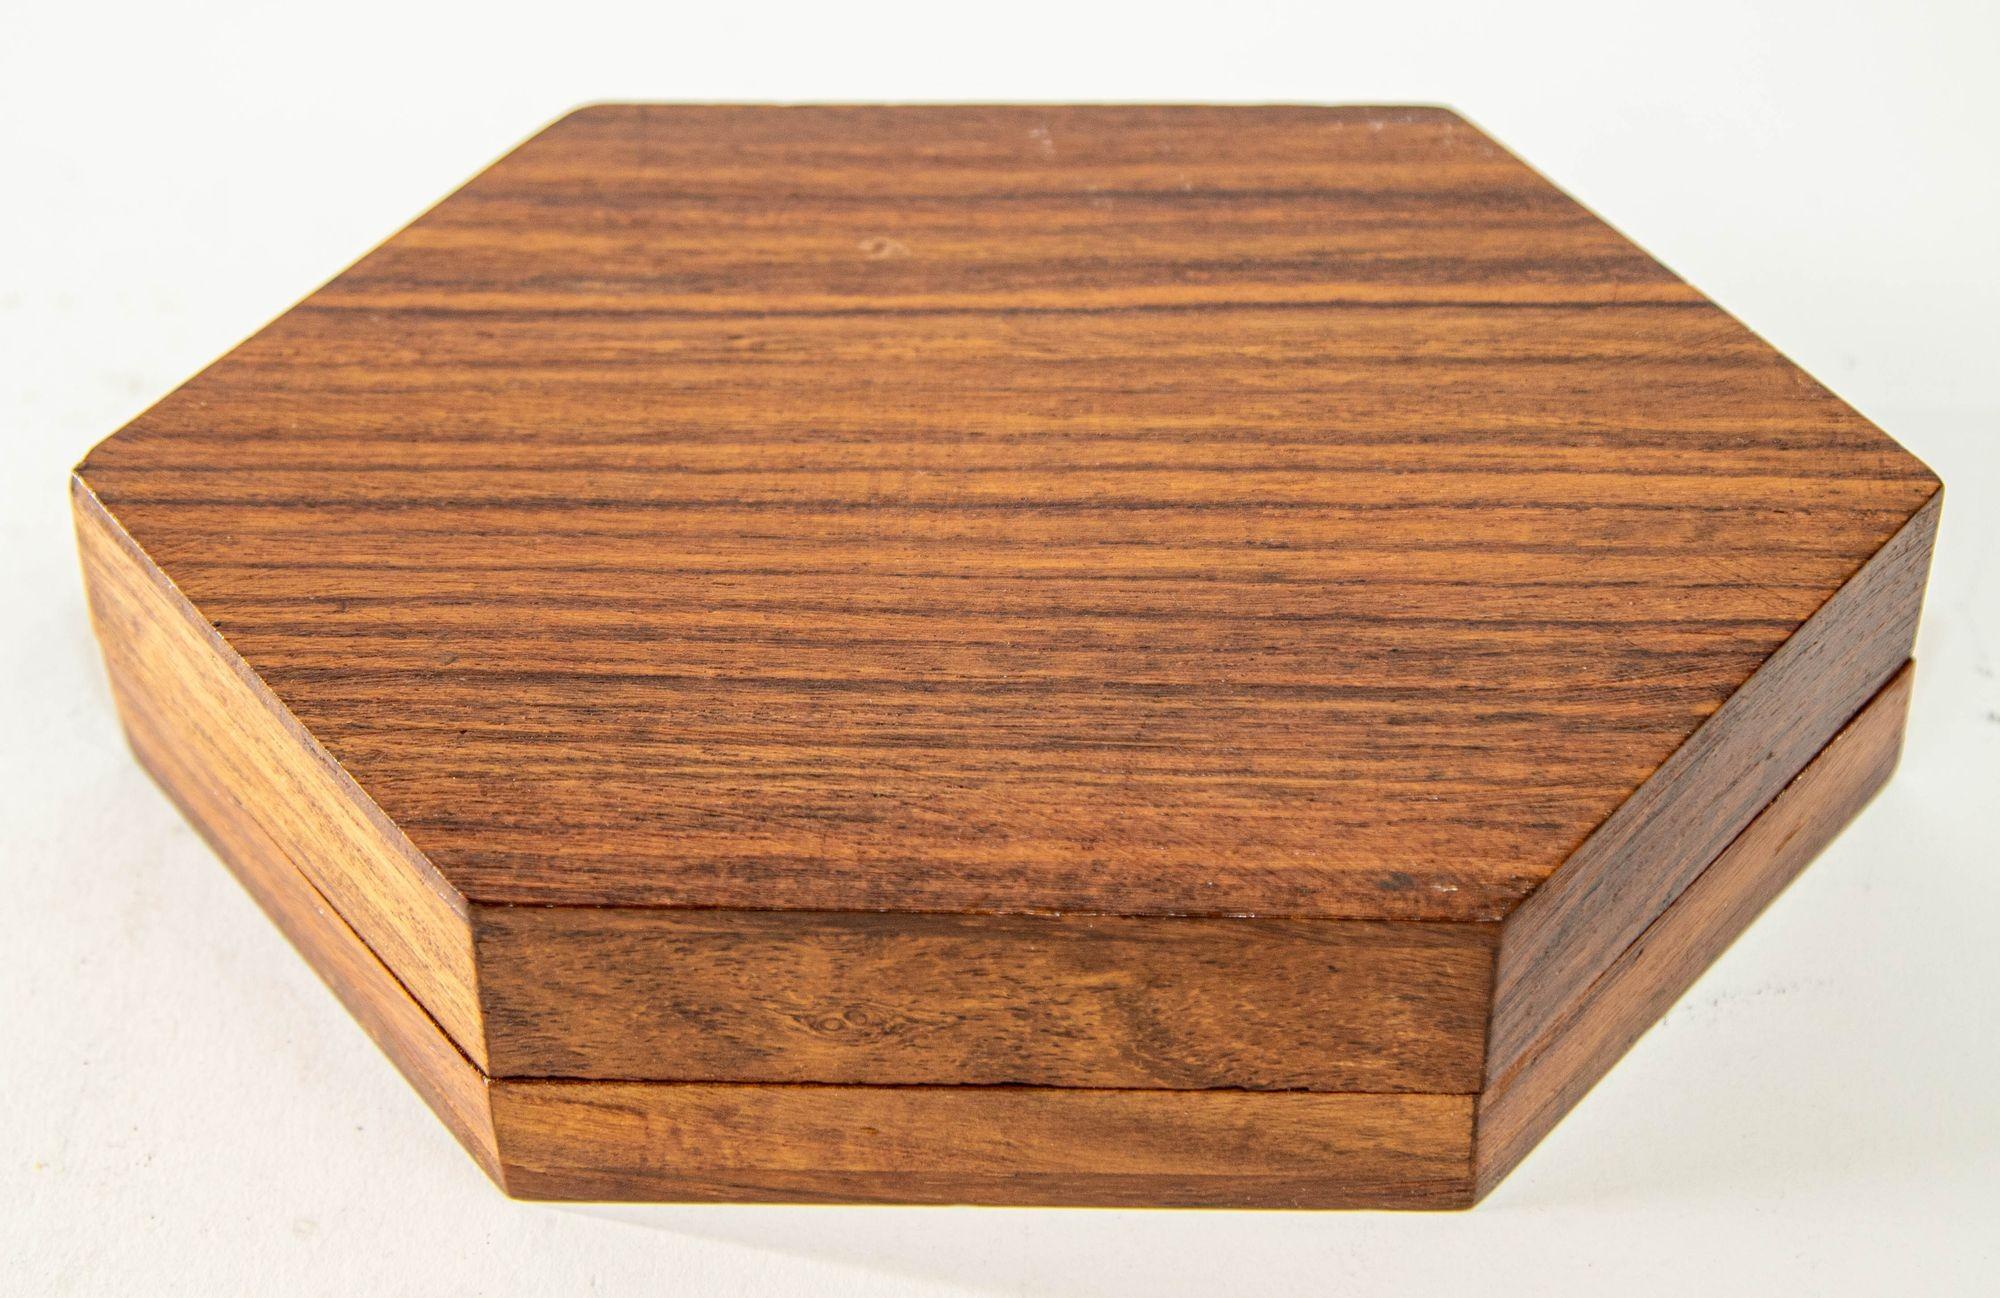 Carved 1960s Vintage Moroccan Inlaid Hexagonal Wood Box For Sale